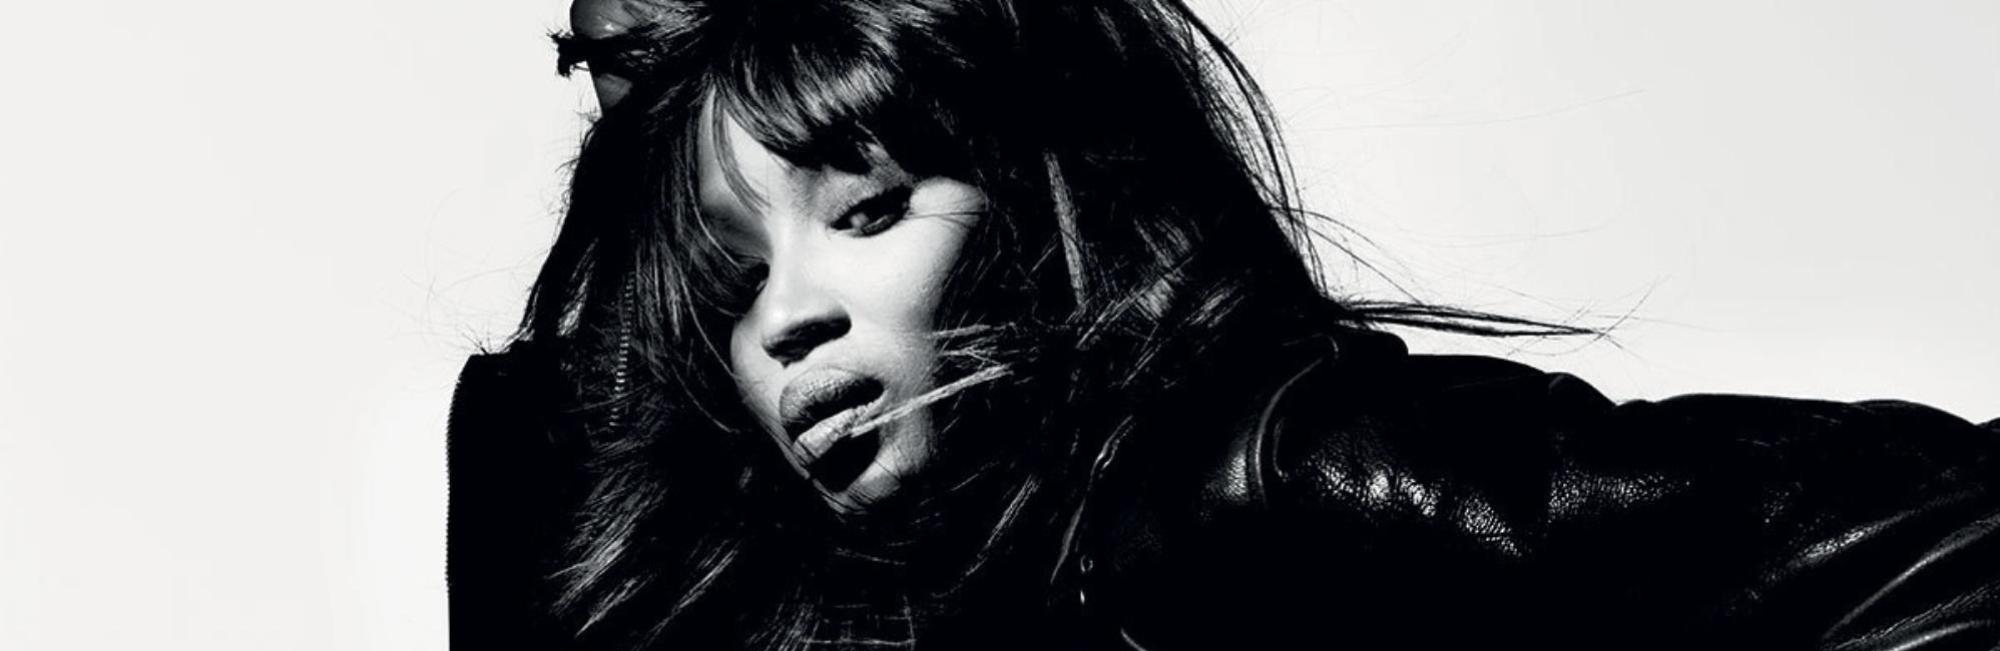 3-naomi-campbell-weighs-in-on-the-plus-size-debate-1459514732.jpg